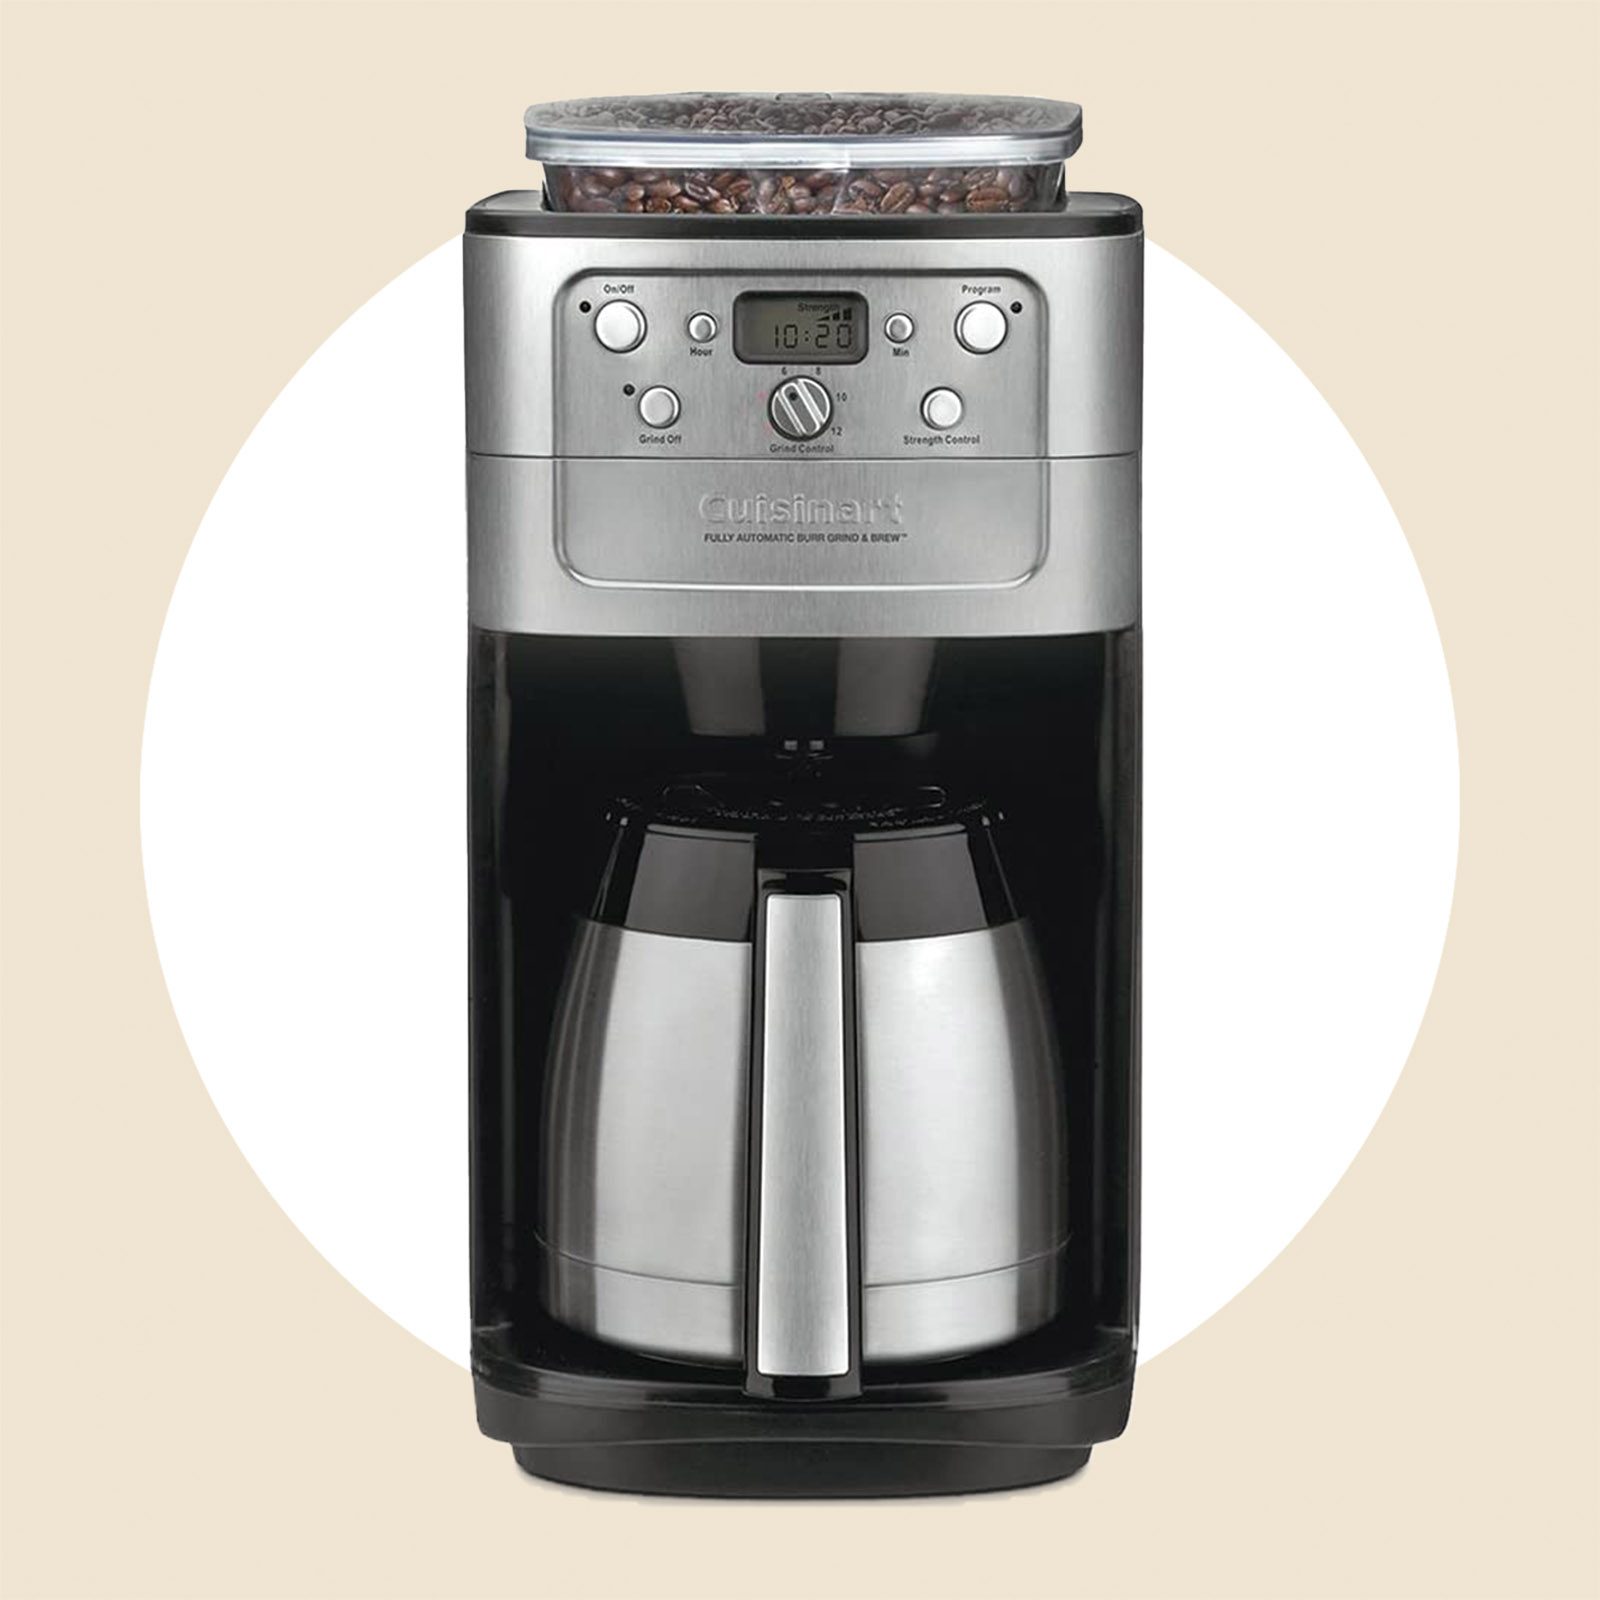 The Best Coffee Makers with Built-in Grinders - Mayan Espresso